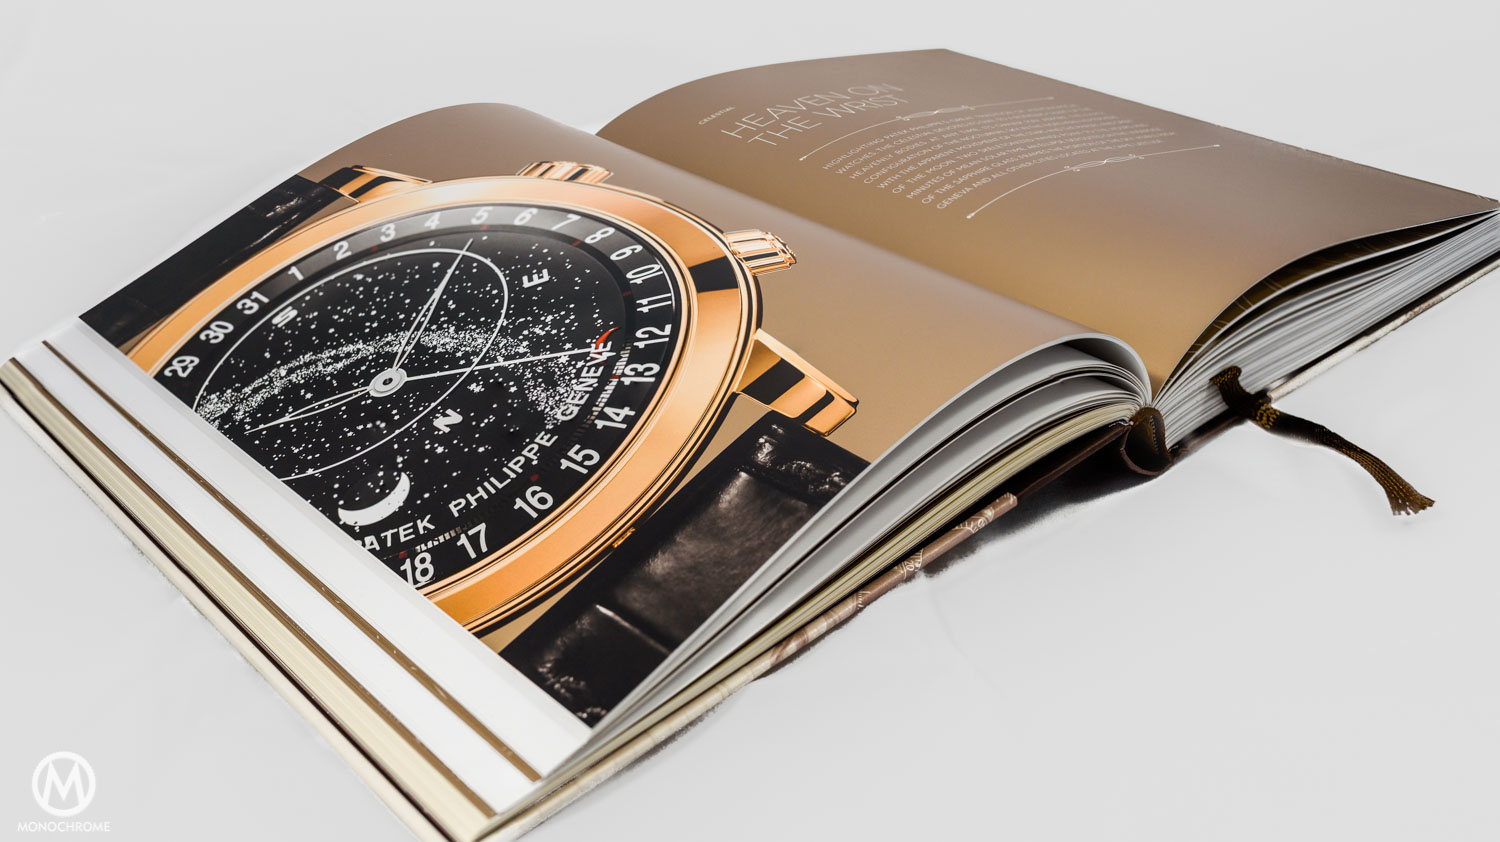 Patek Philippe Collection book